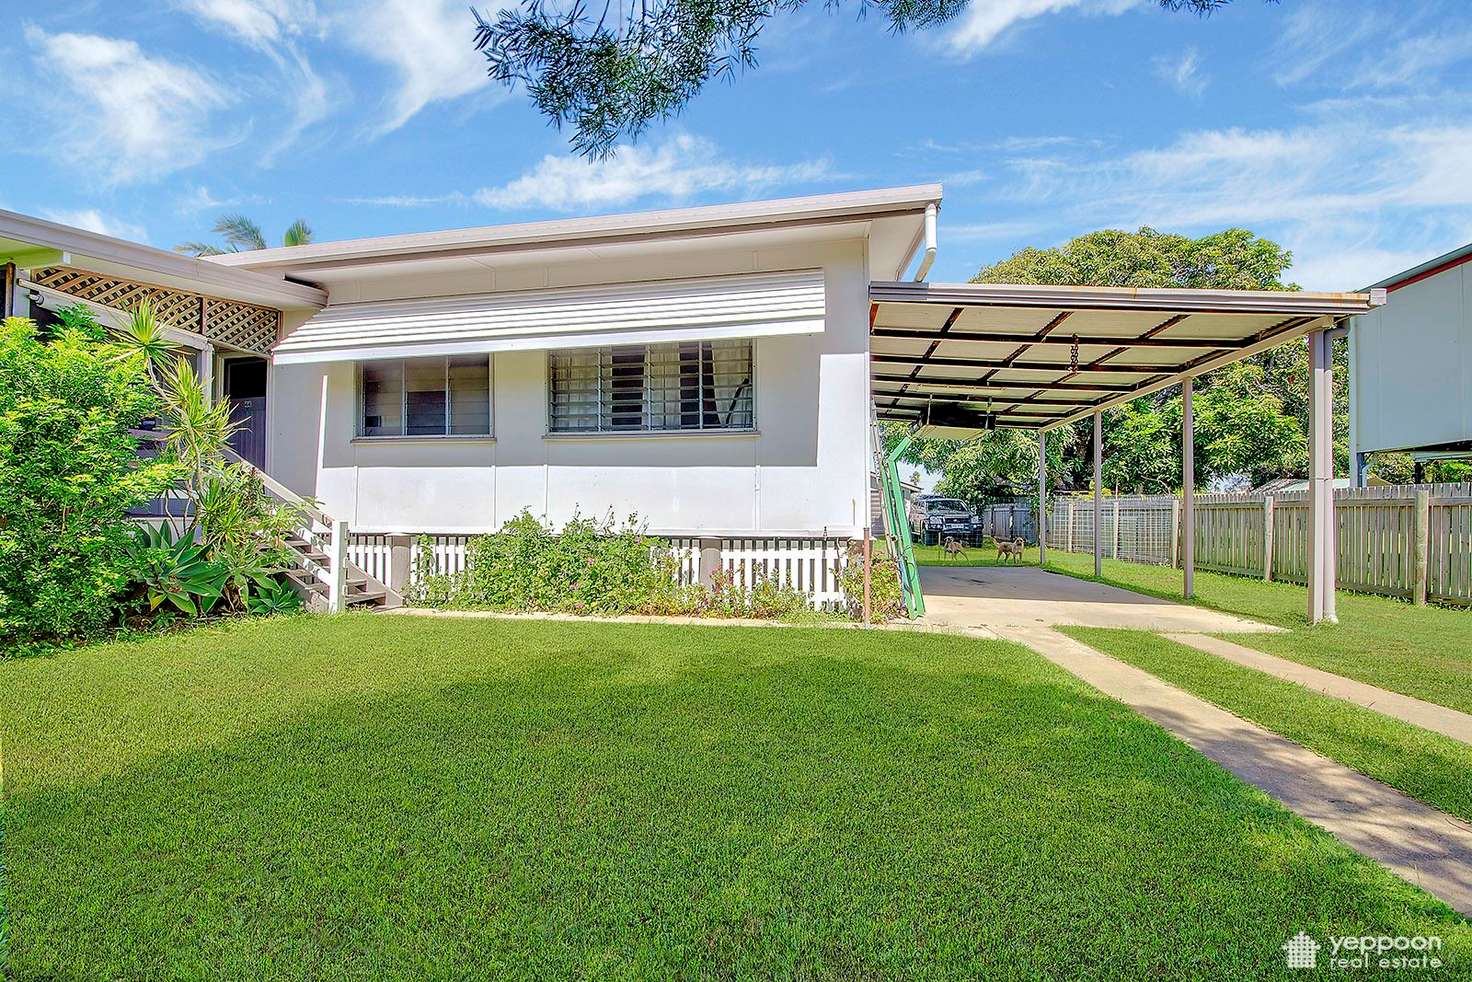 Main view of Homely house listing, 44 William Street, Yeppoon QLD 4703